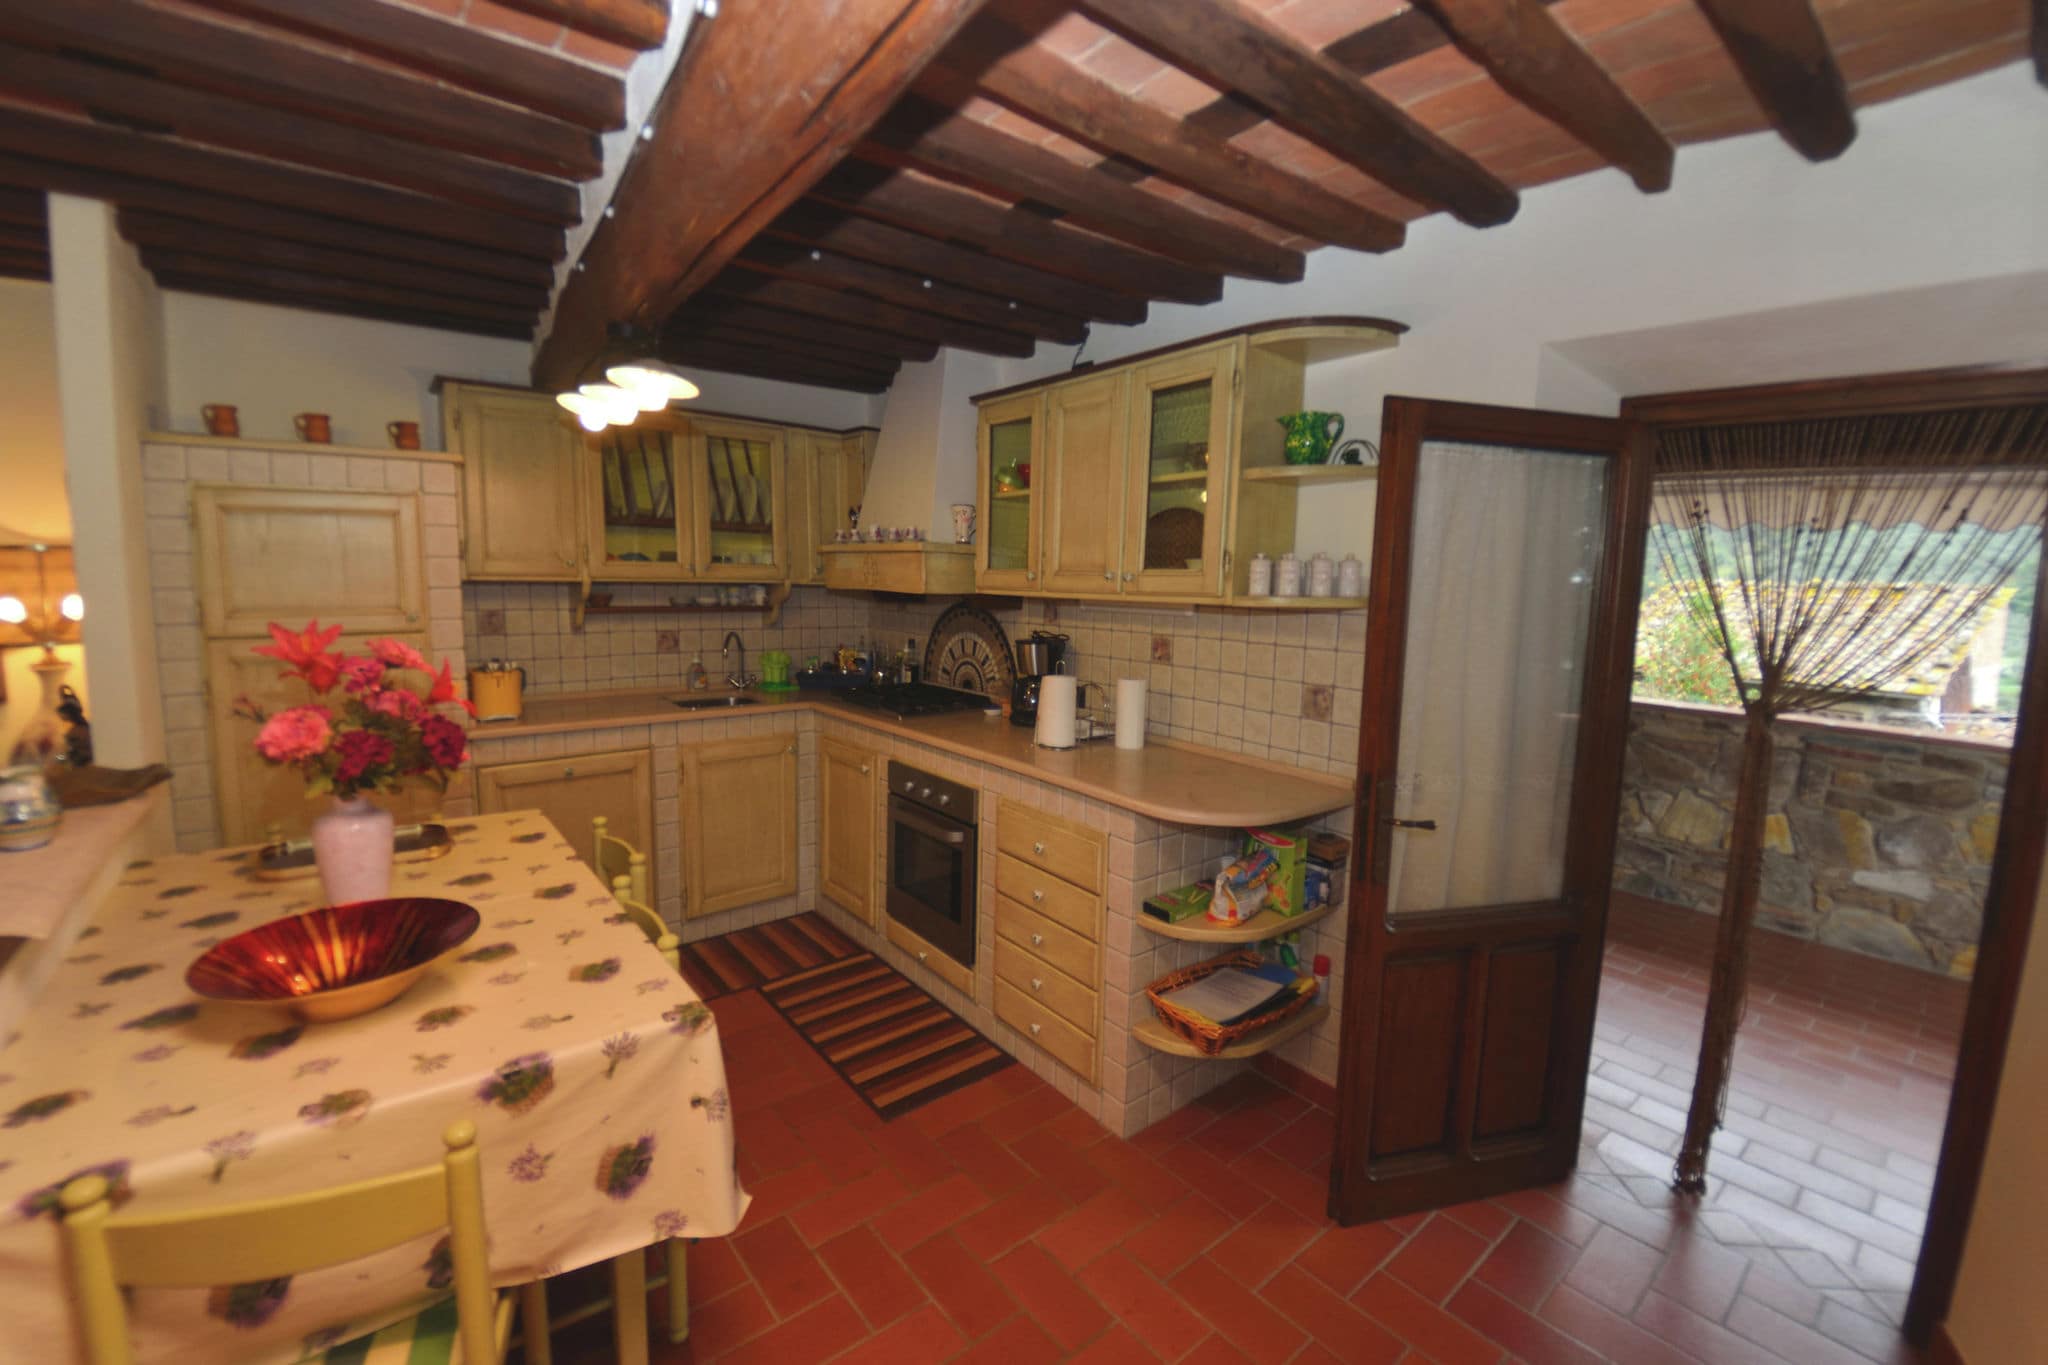 Modern villa with private pool and fenced garden 12 km from Lucca